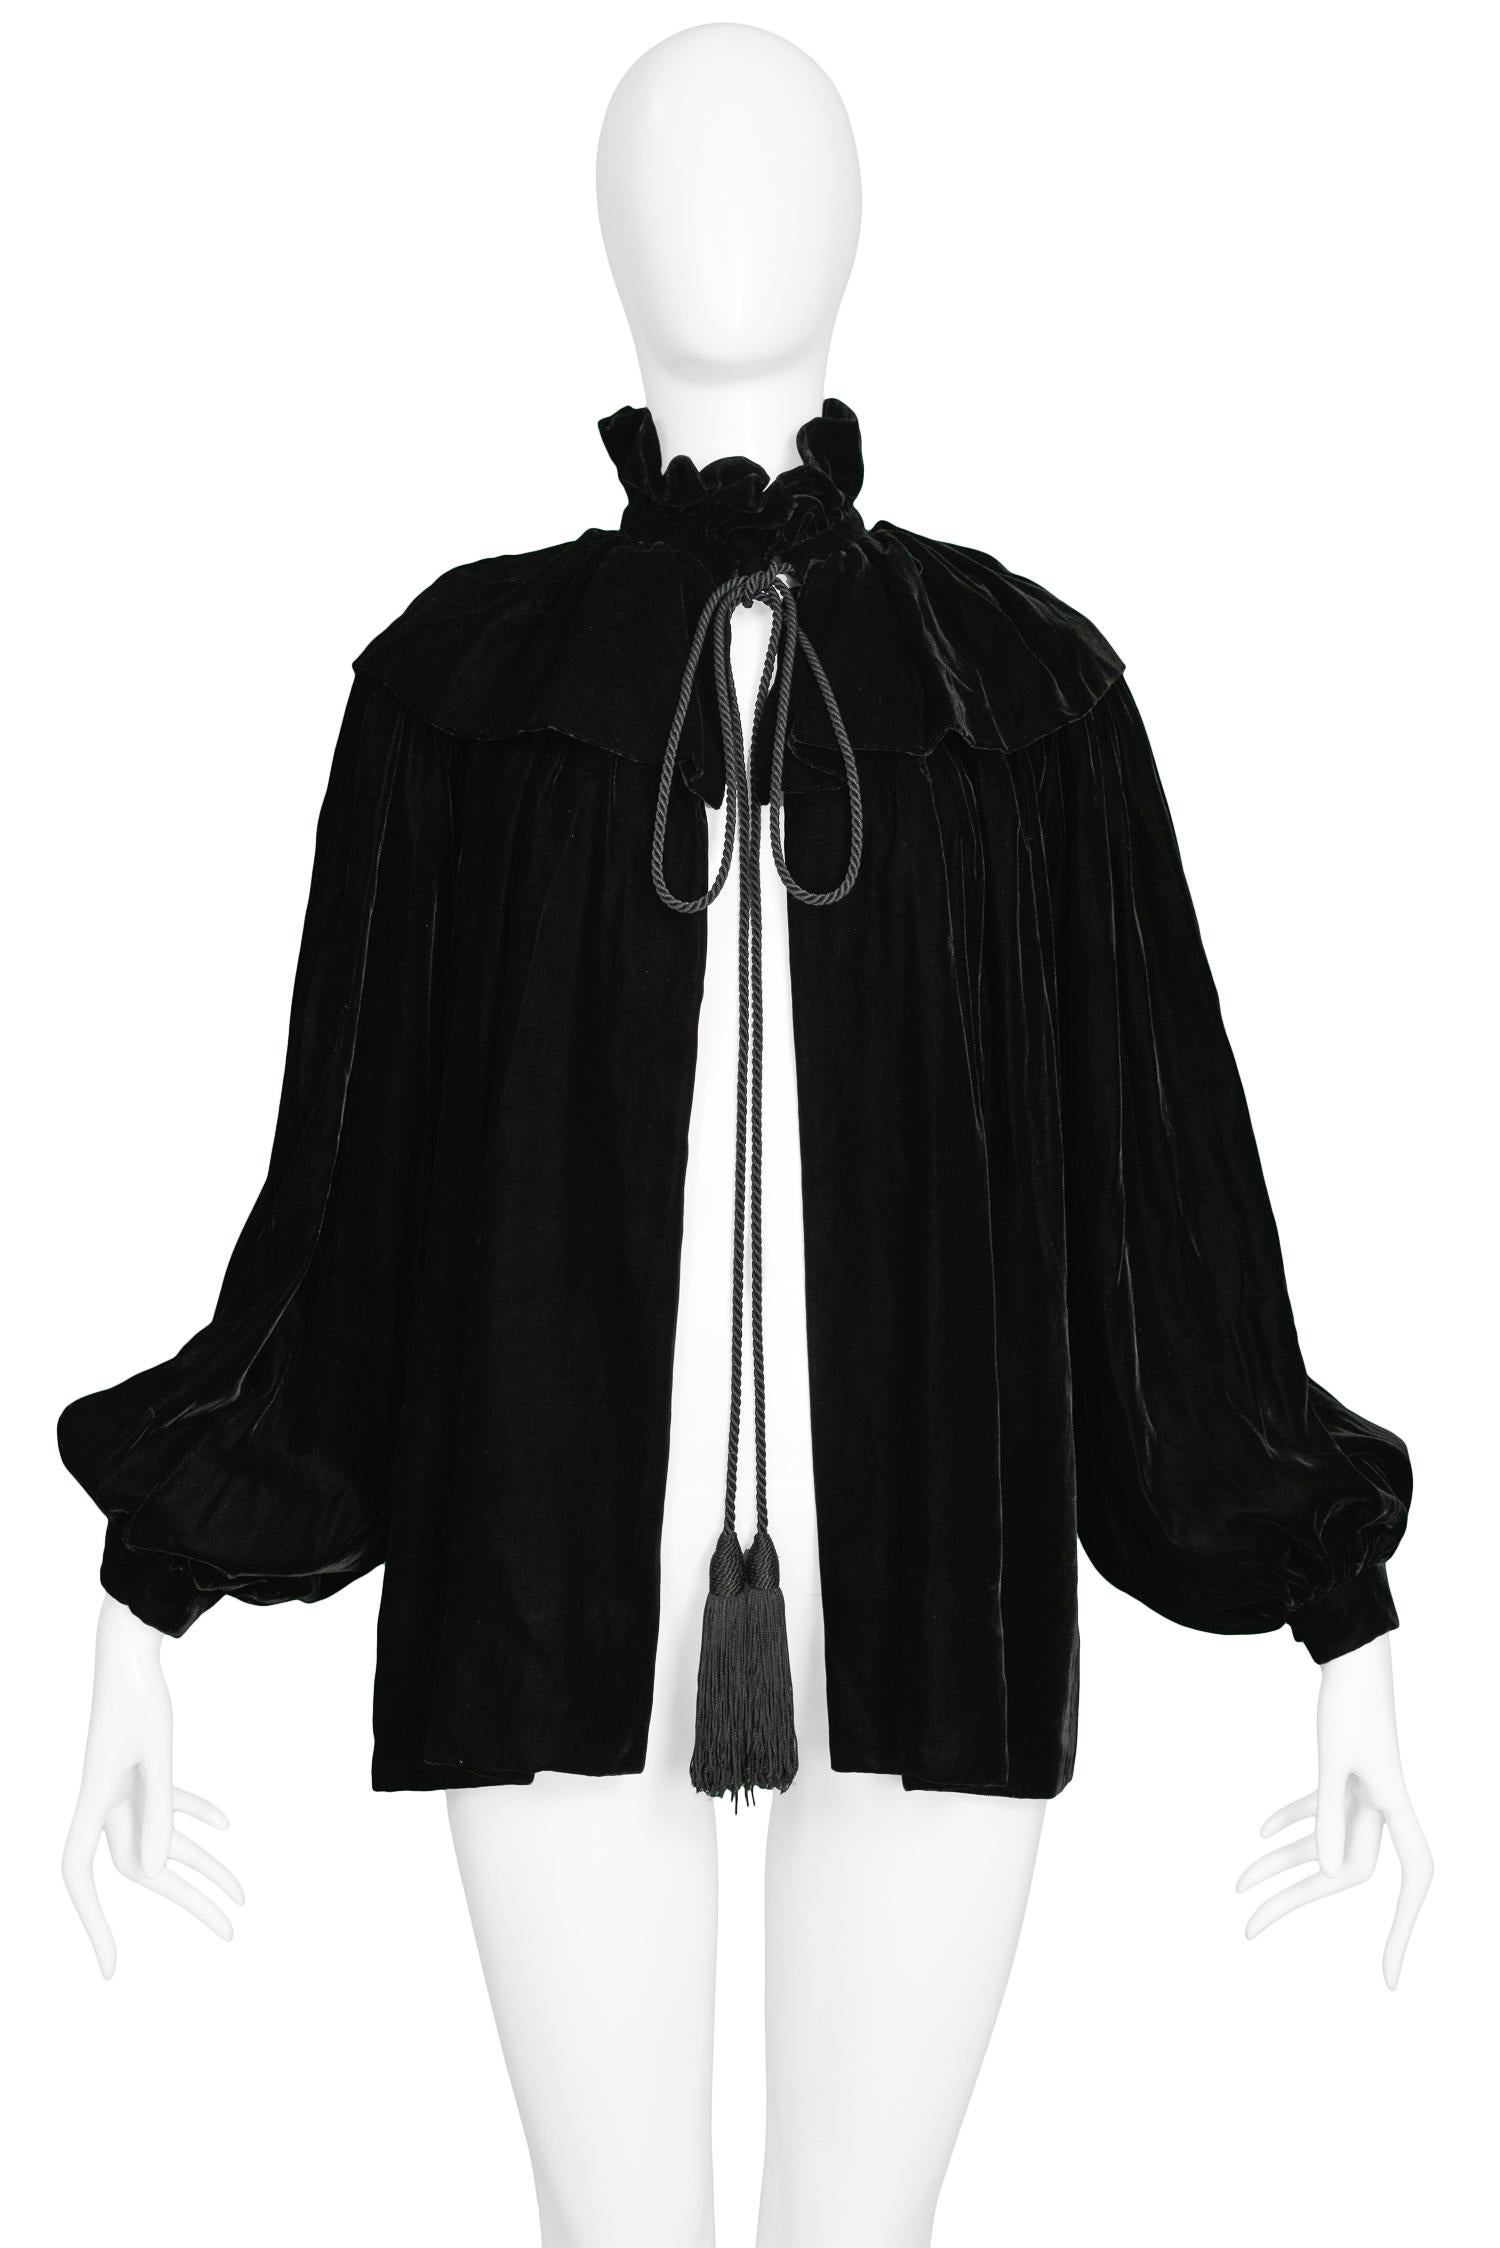 Vintage Yves Saint Laurent black velvet cloak featuring layering at shoulders, high ruffle collar, gathered wrists & tassels that tie at front closure.

Excellent Condition.

Size: 34